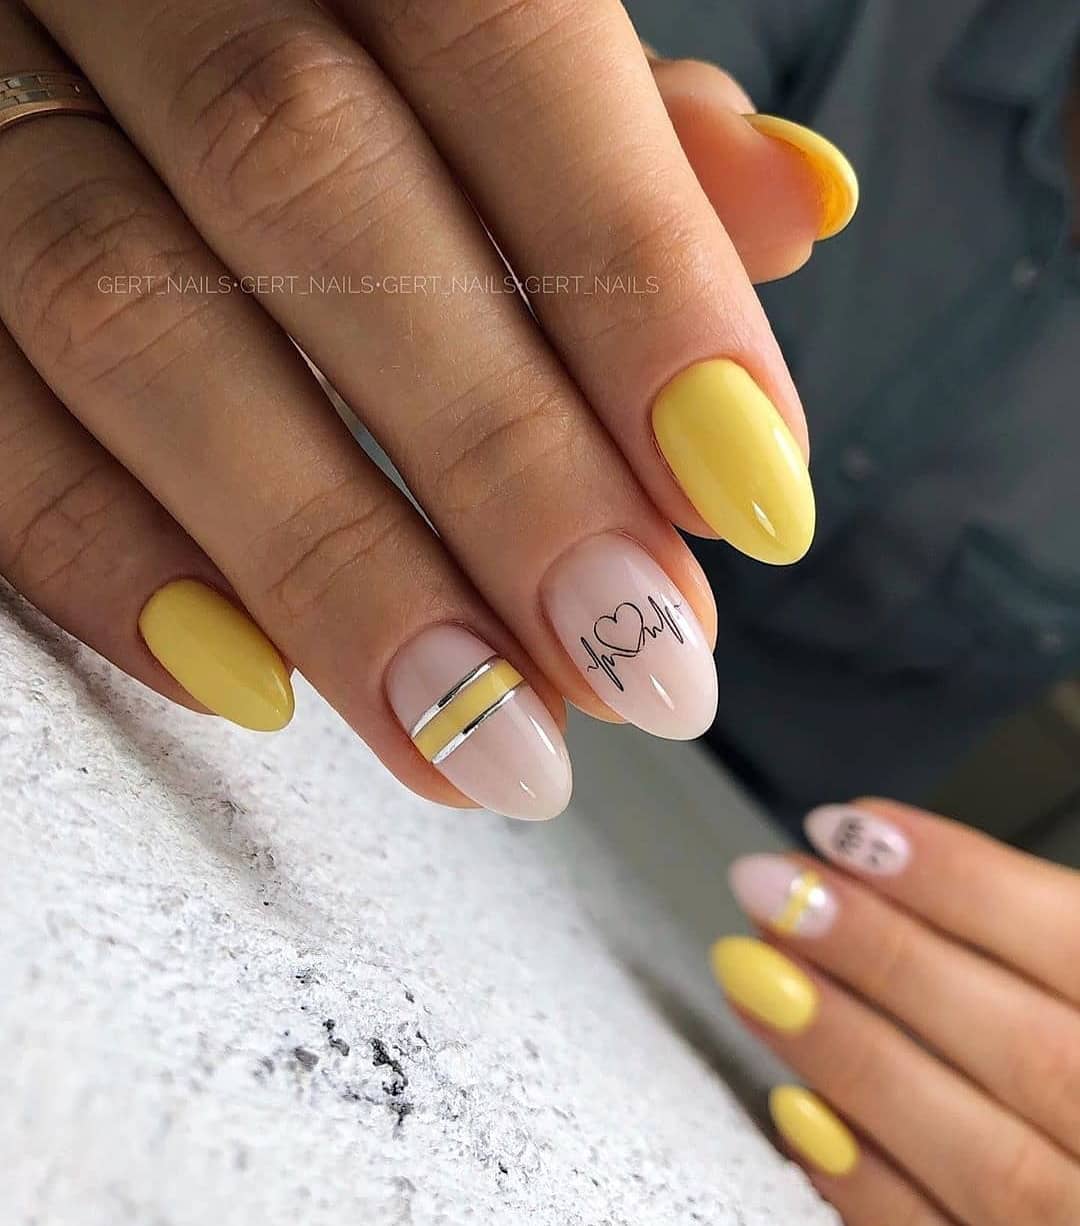 Over 100 Bright Summer Nail Art Designs That Will Be So Trendy images 58